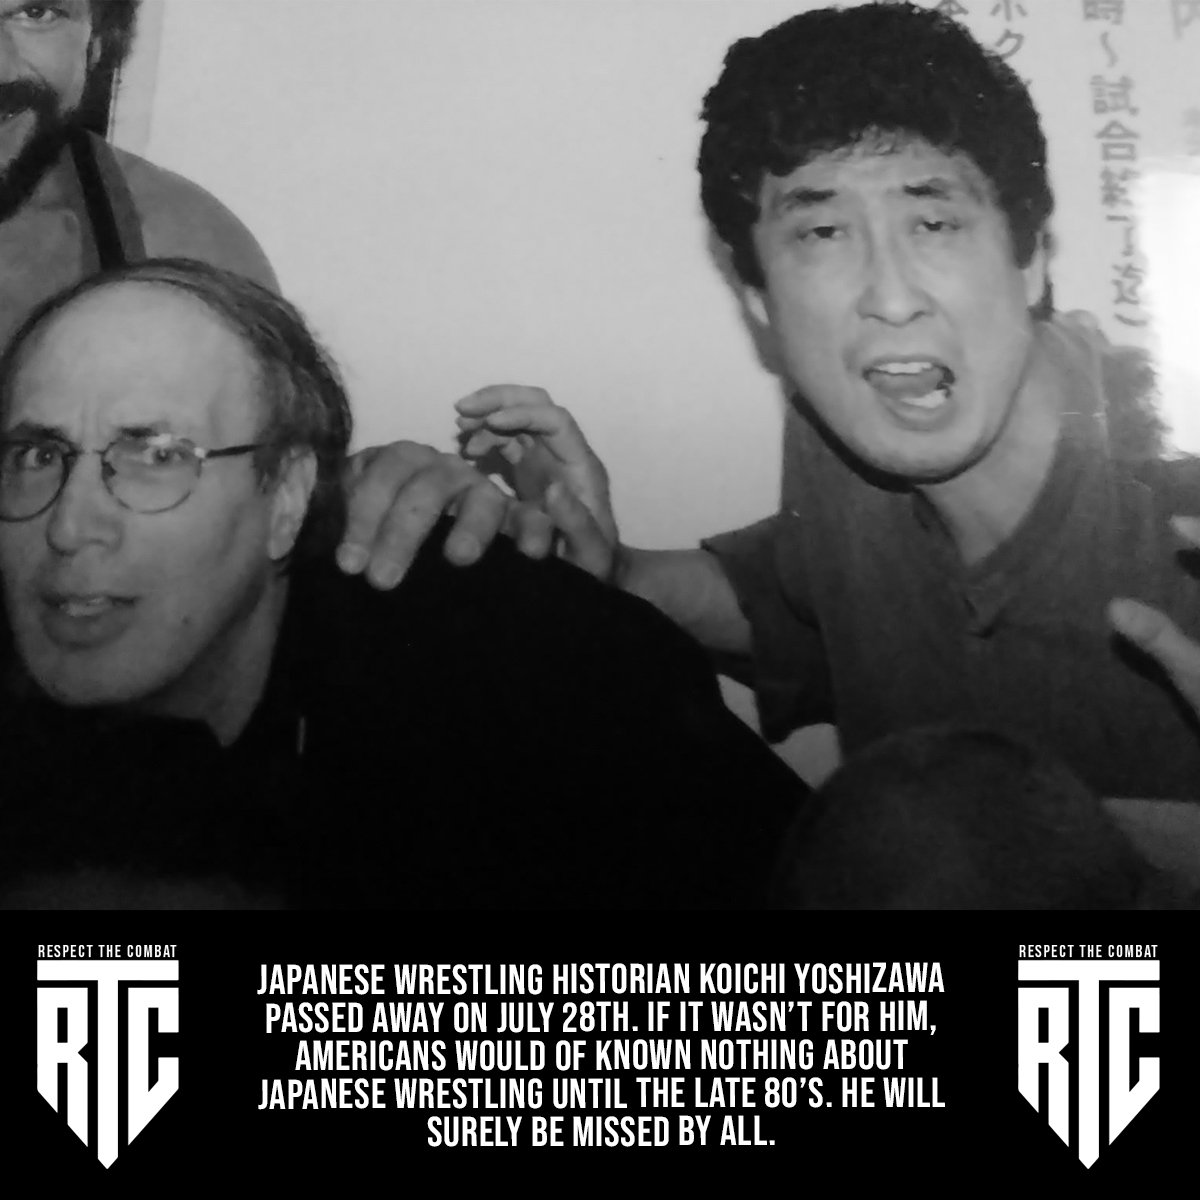 He will surely be missed 

#japanesewrestling #historian #rip #wrestling #prowrestling #wrestlingnews